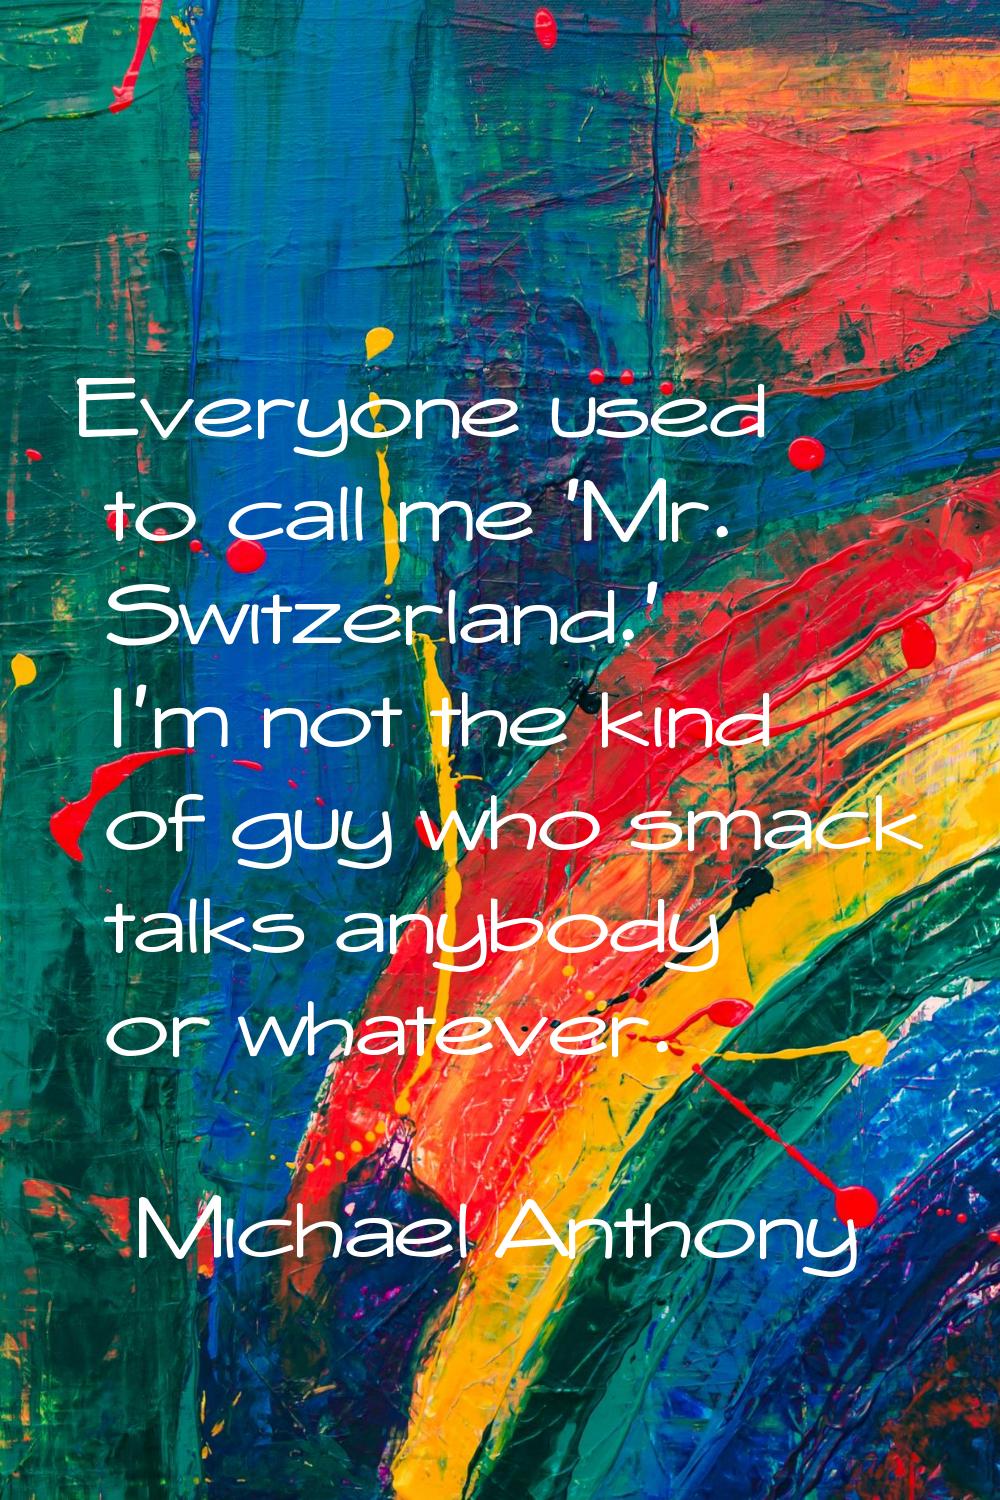 Everyone used to call me 'Mr. Switzerland.' I'm not the kind of guy who smack talks anybody or what